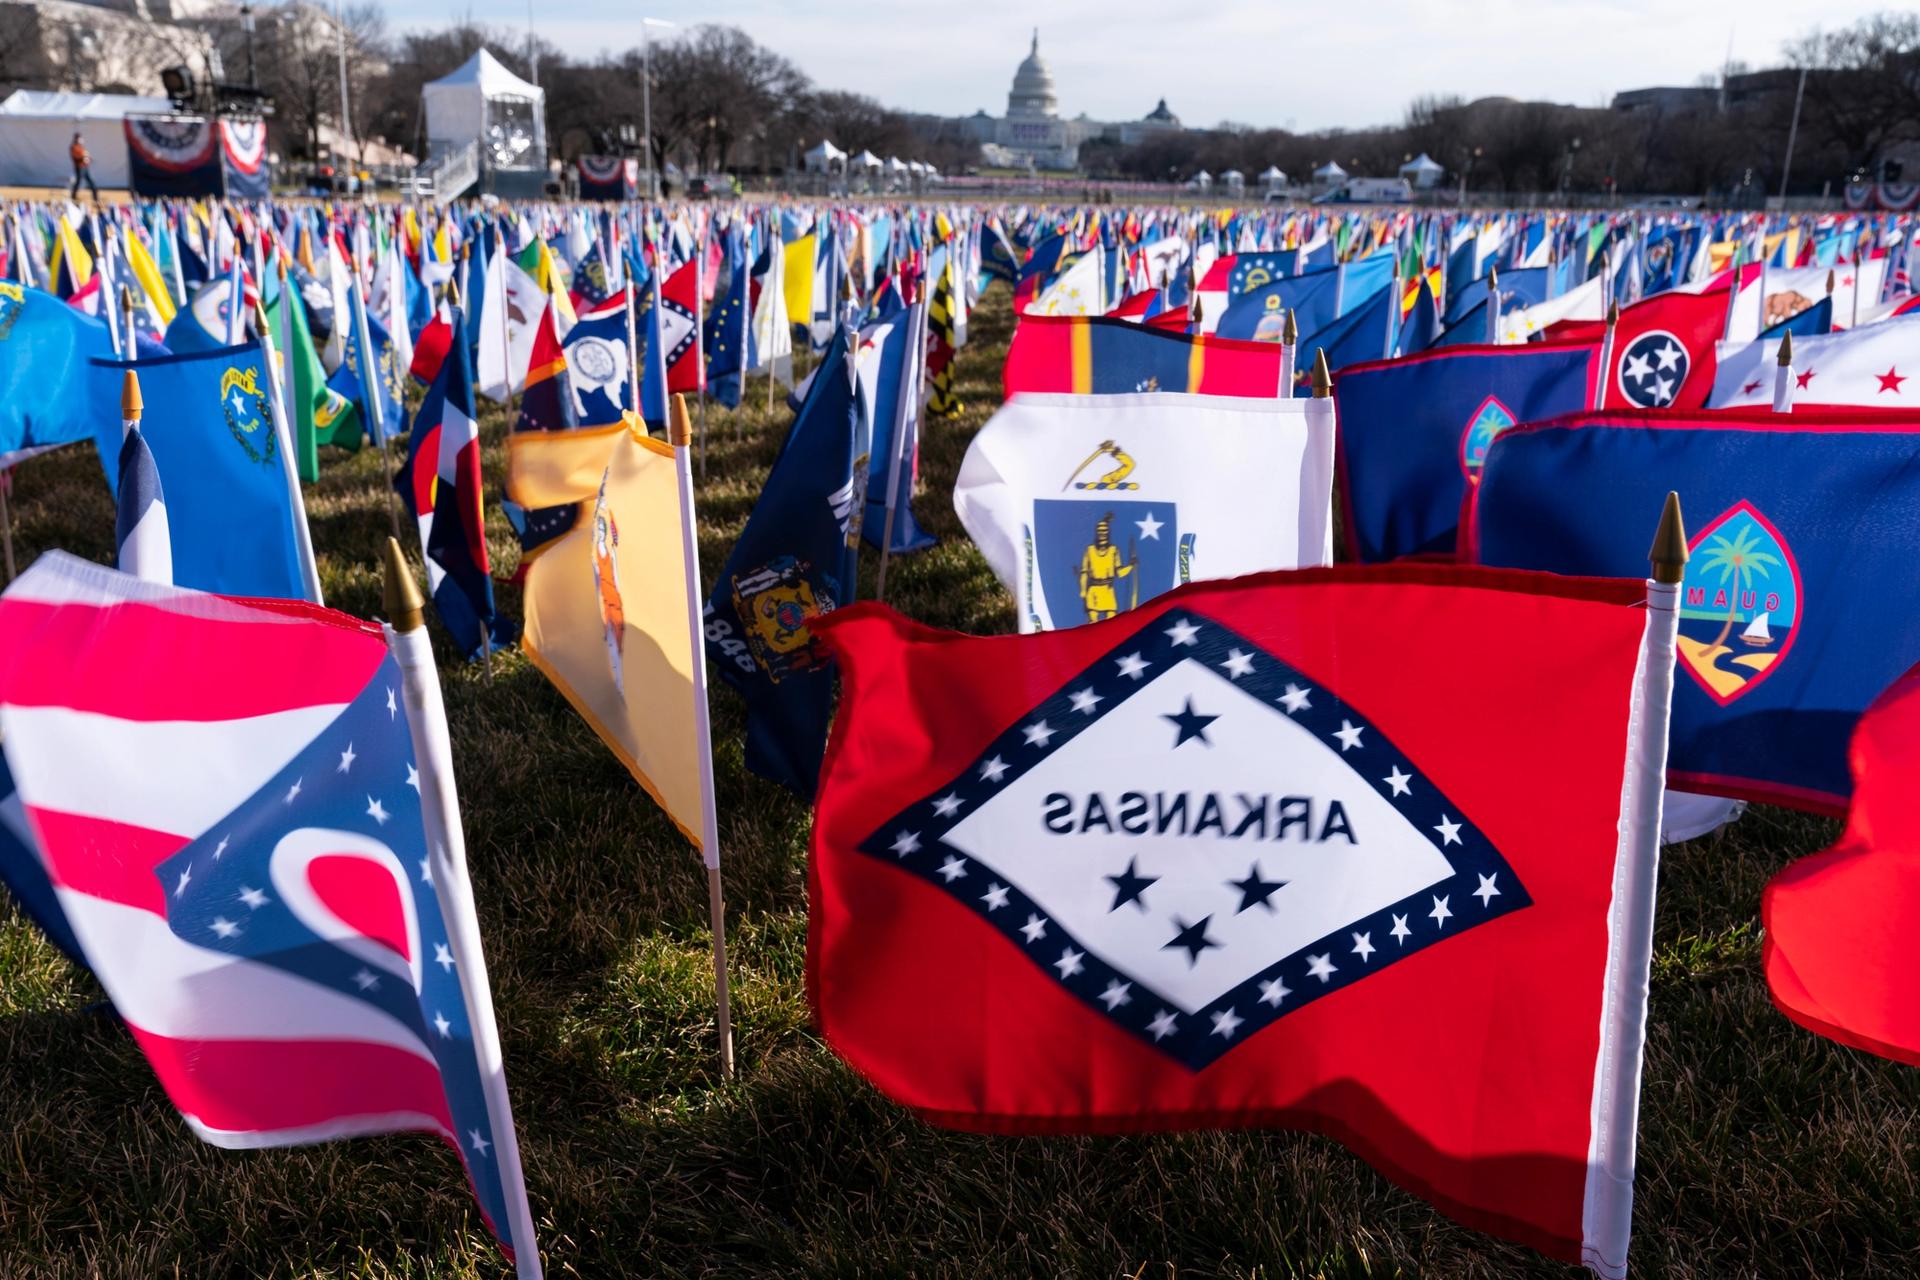 State flags are placed on the National Mall in Washington, DC, ahead of the inauguration of President-elect Joe Biden and Vice President-elect Kamala Harris Photo: AP/Alex Brandon